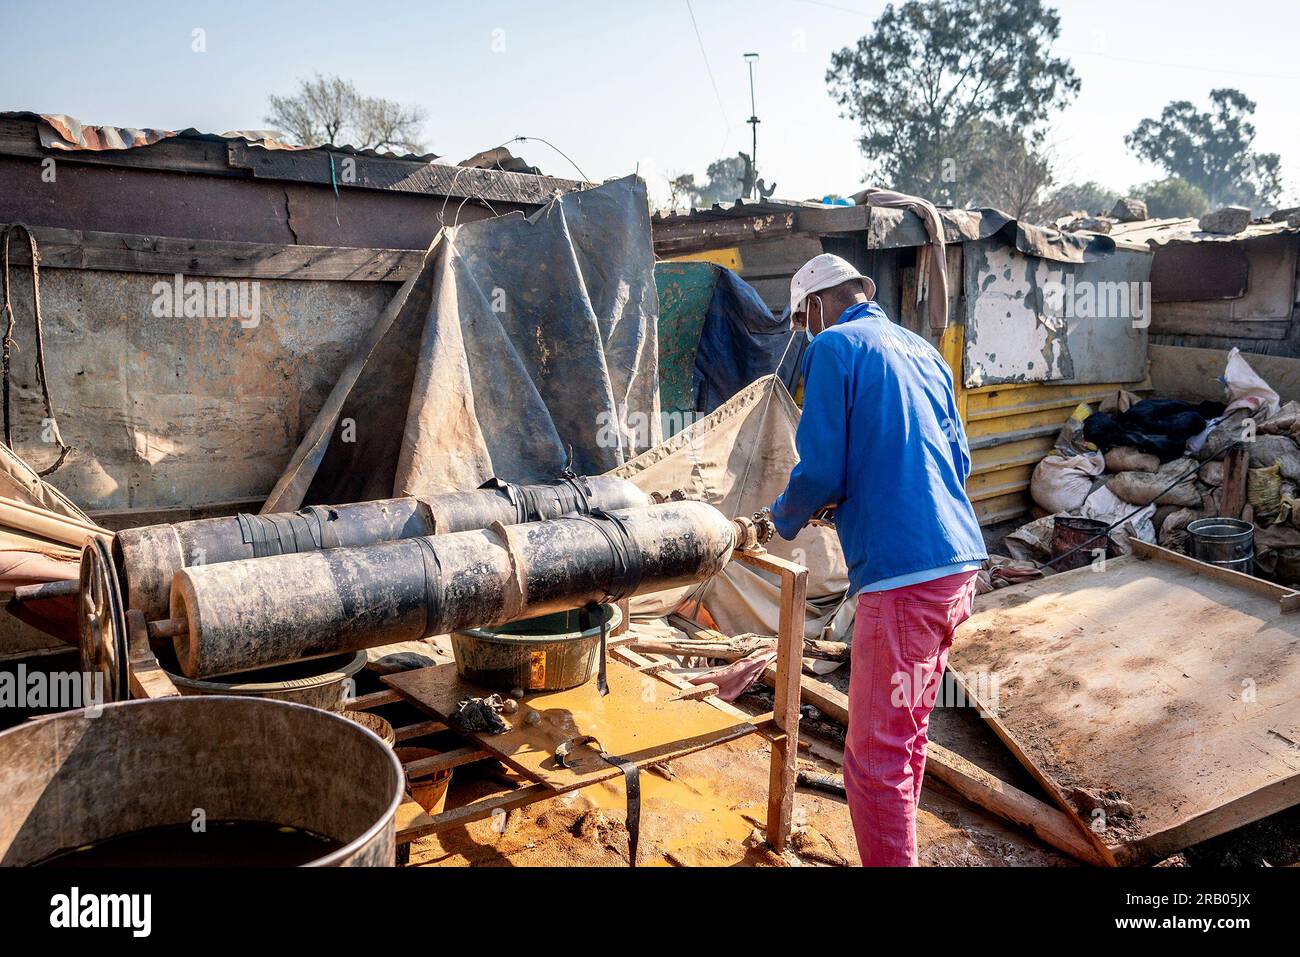 Johannesburg, South Africa. 6th July, 2023. A staff member examines gas cylinders at the scene of a gas leak near Boksburg, Gauteng Province, South Africa, July 6, 2023. At least 16 people were confirmed dead on Wednesday evening following suspected gas inhalation at an informal settlement in Boksburg, east of Johannesburg. Credit: Shiraaz Mohamed/Xinhua/Alamy Live News Stock Photo